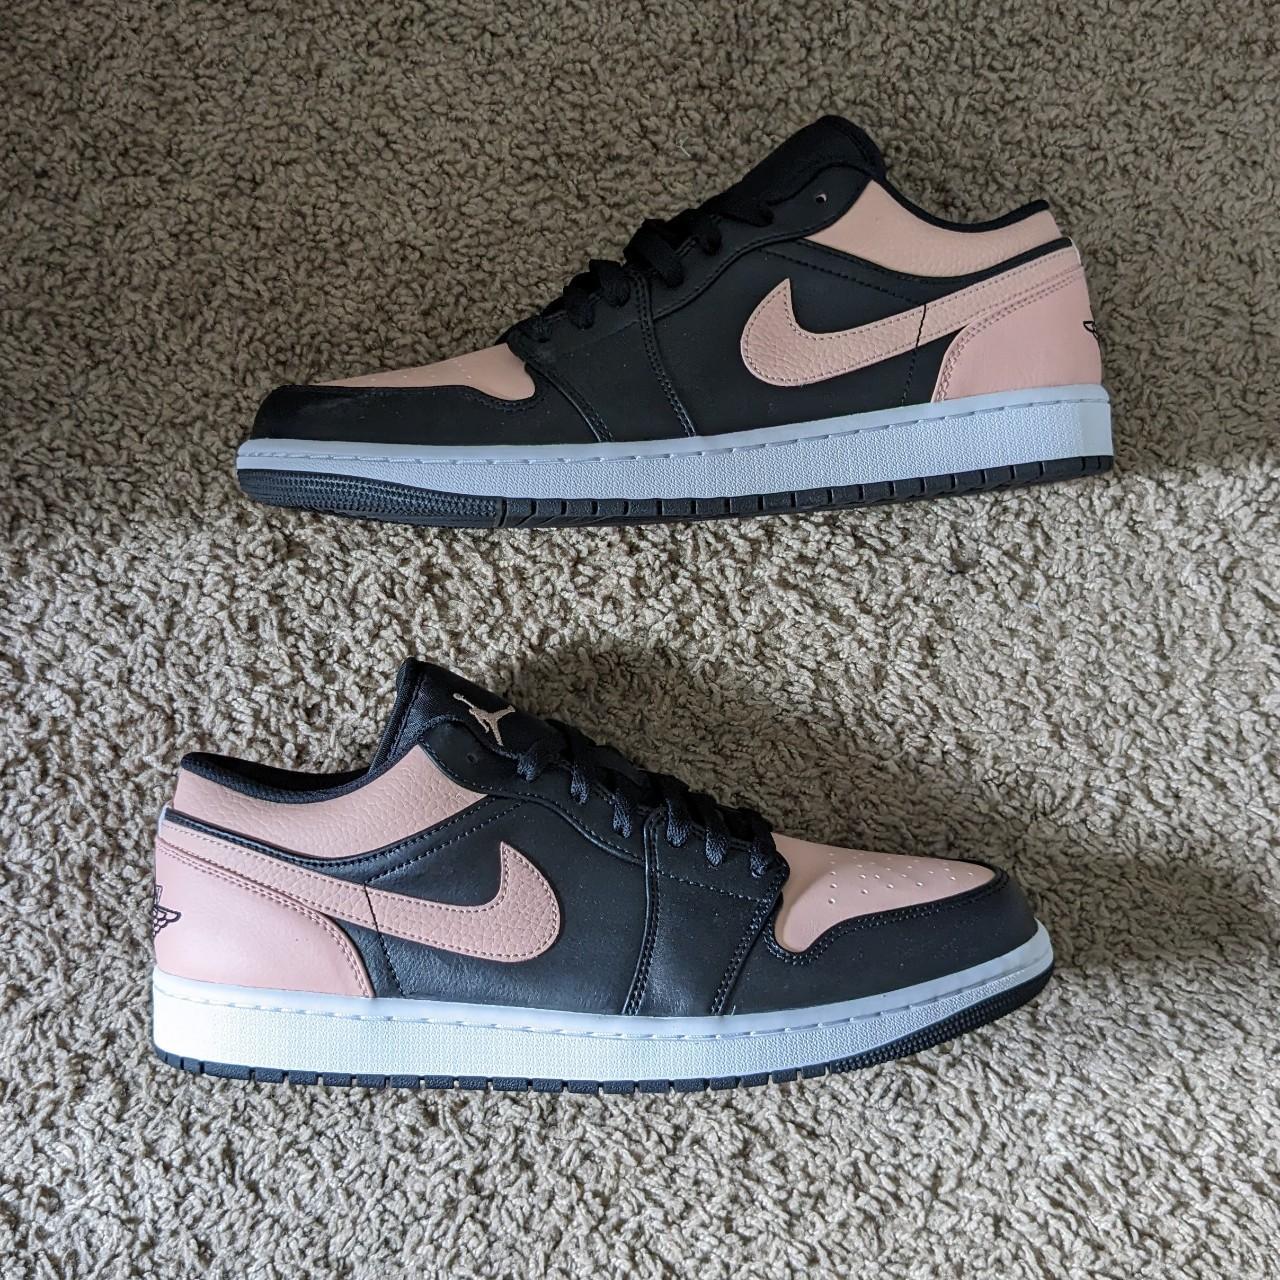 Nike Men's Black and Pink Trainers